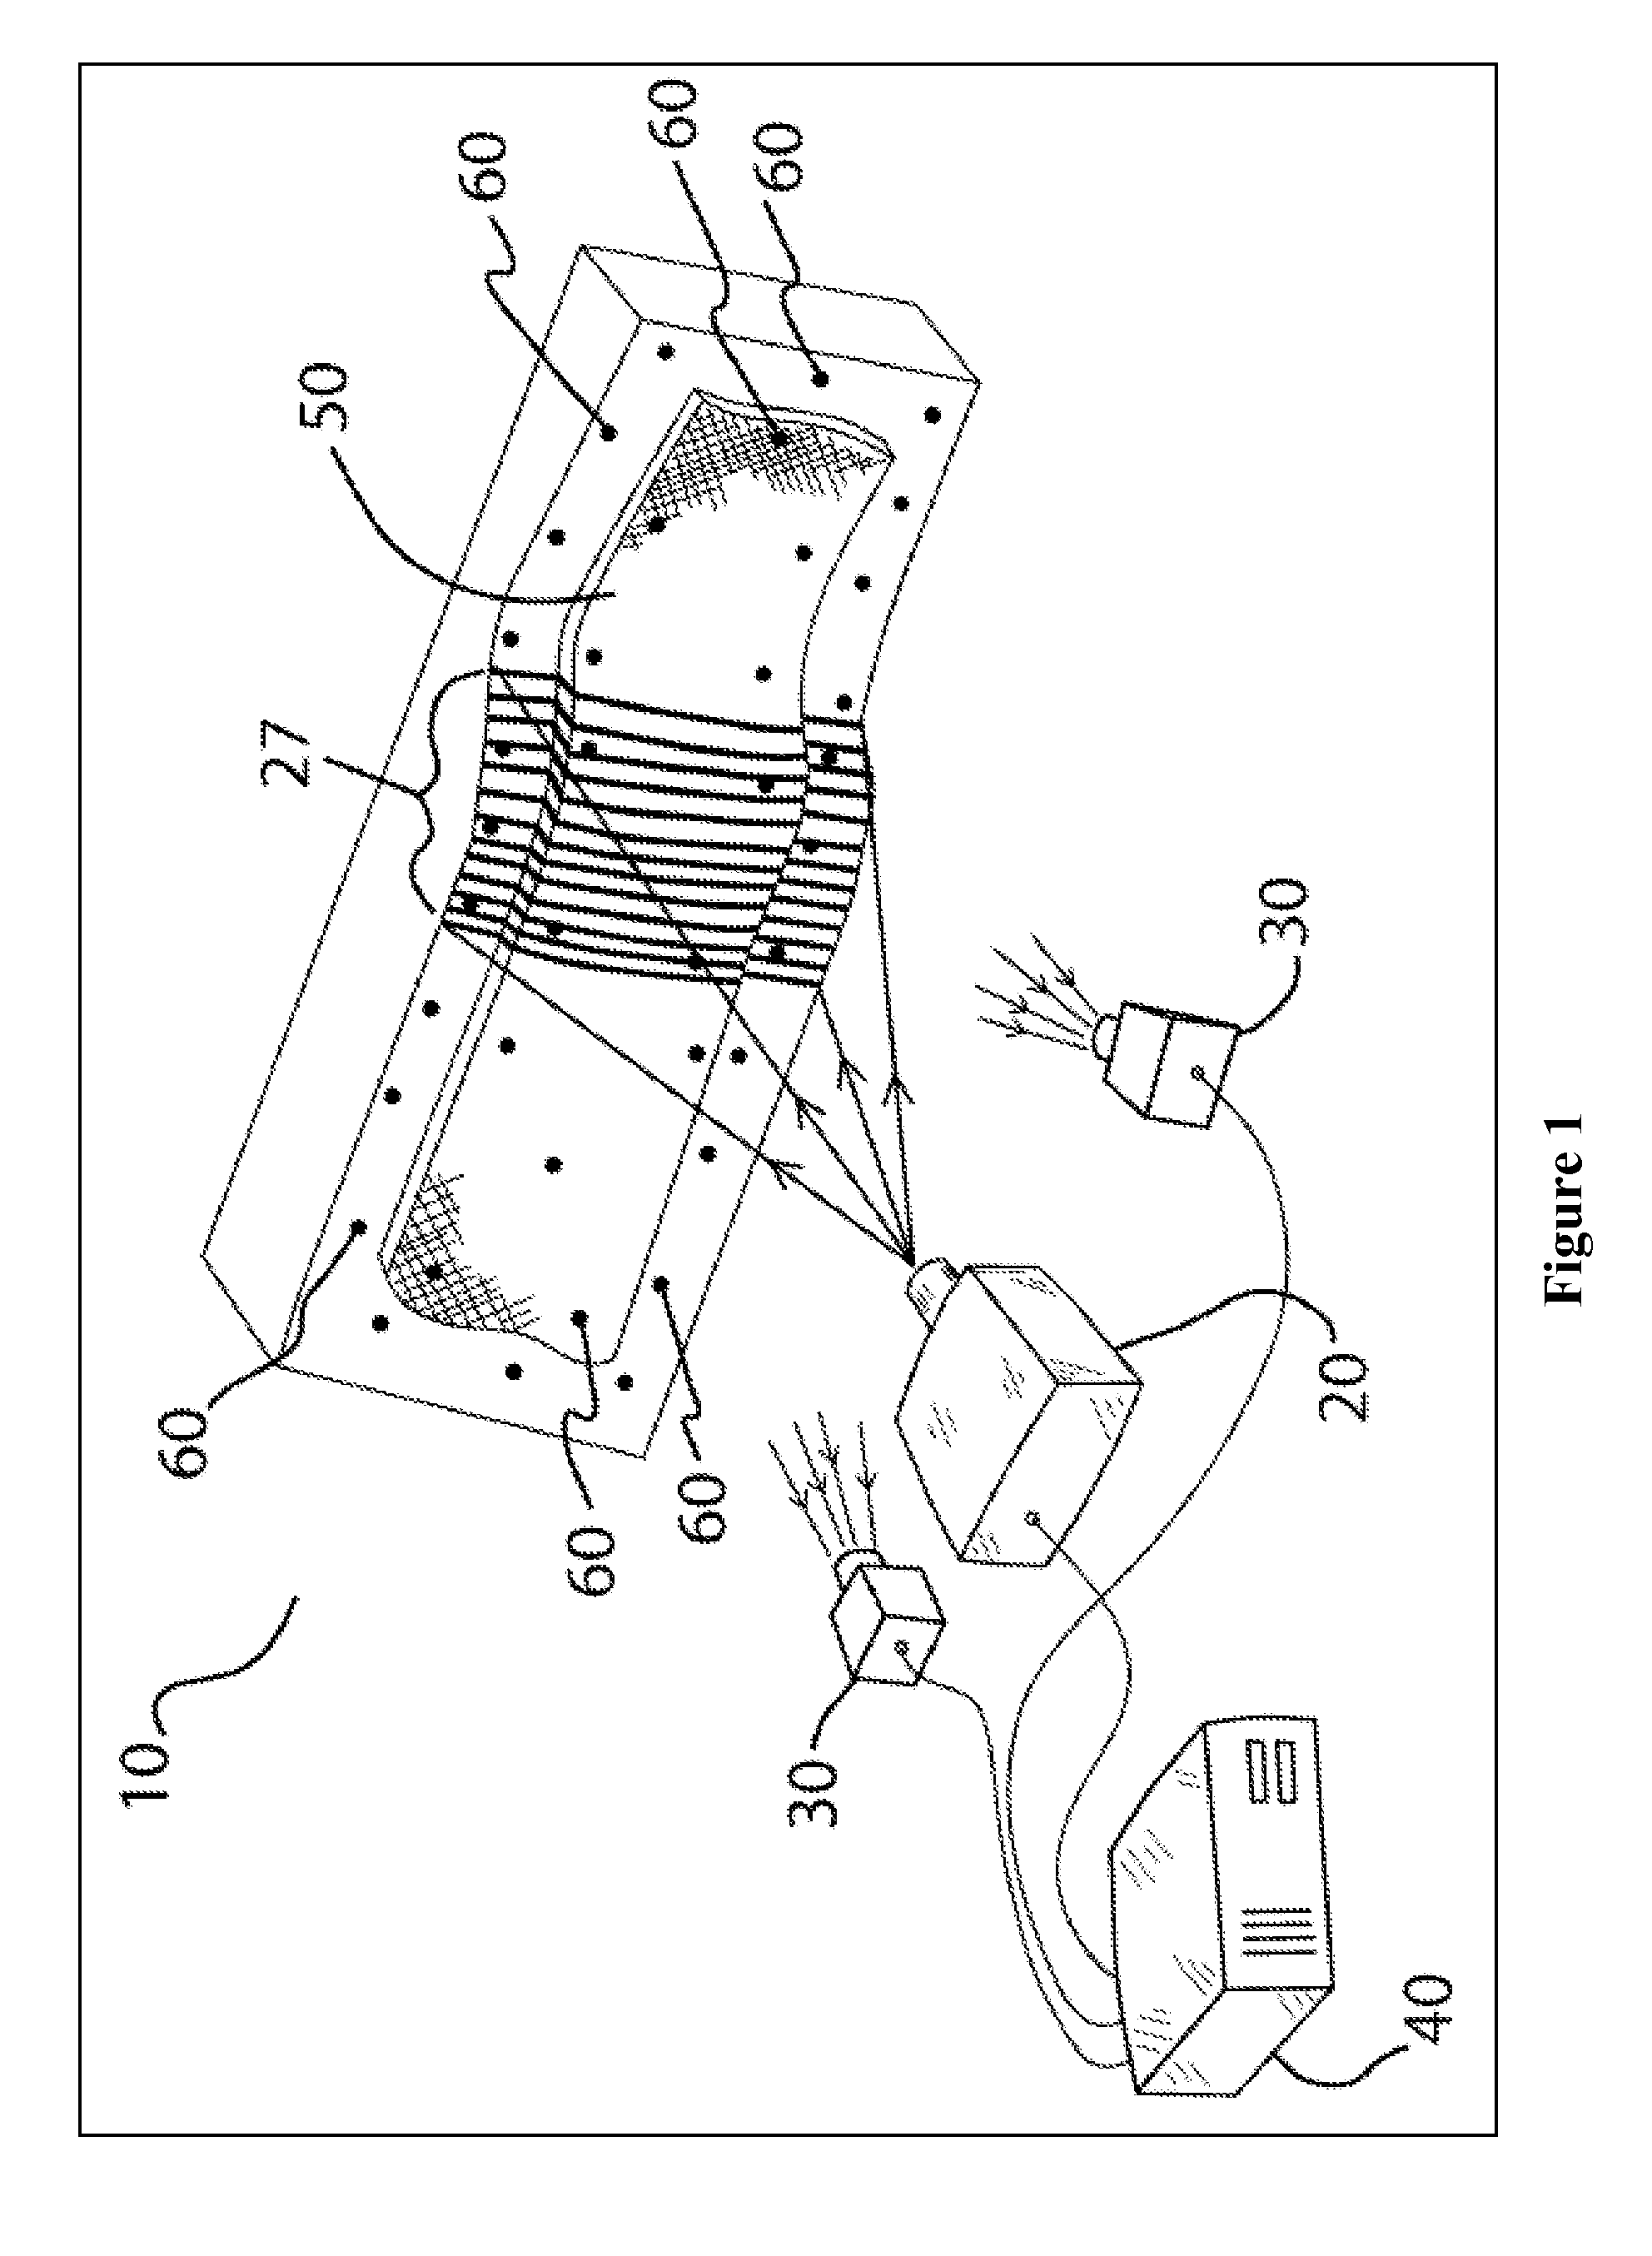 Cell Feature Extraction and Labeling Thereof